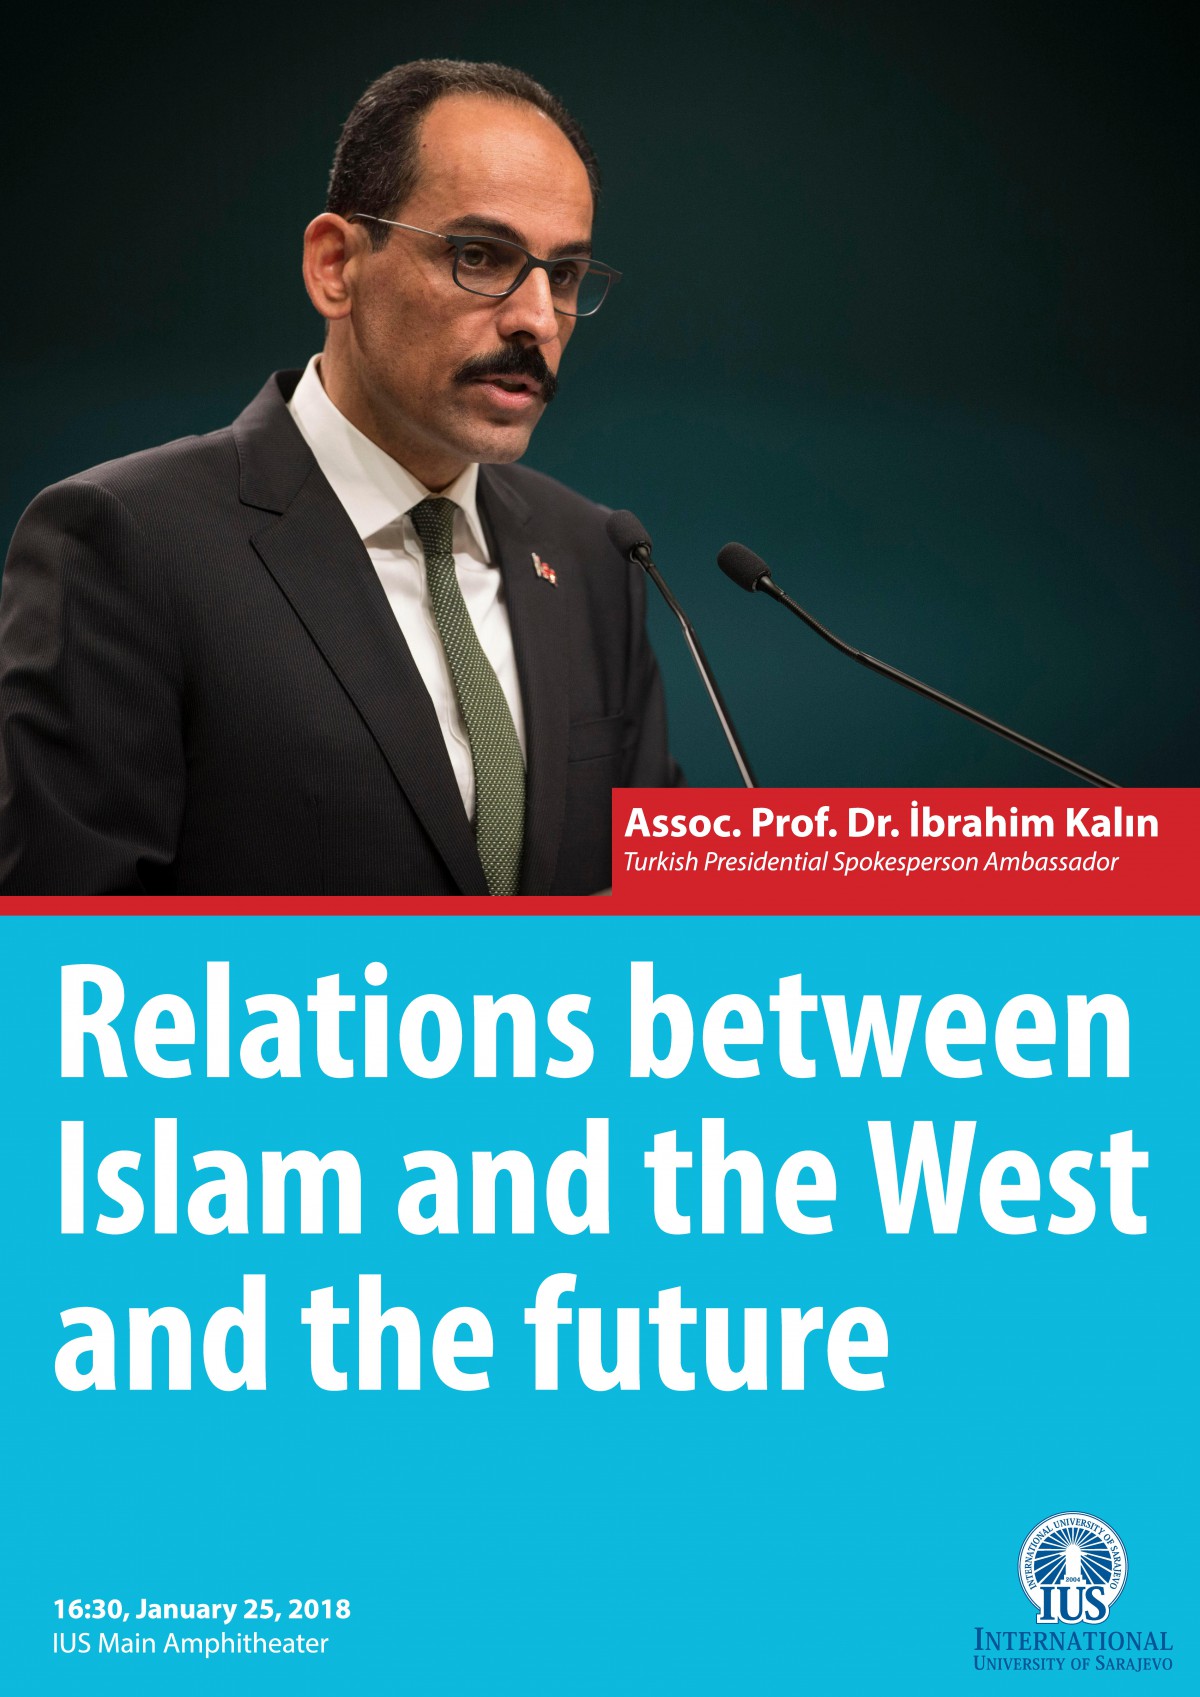  Dr İbrahim Kalın: Relations between Islam and the West, and the future 